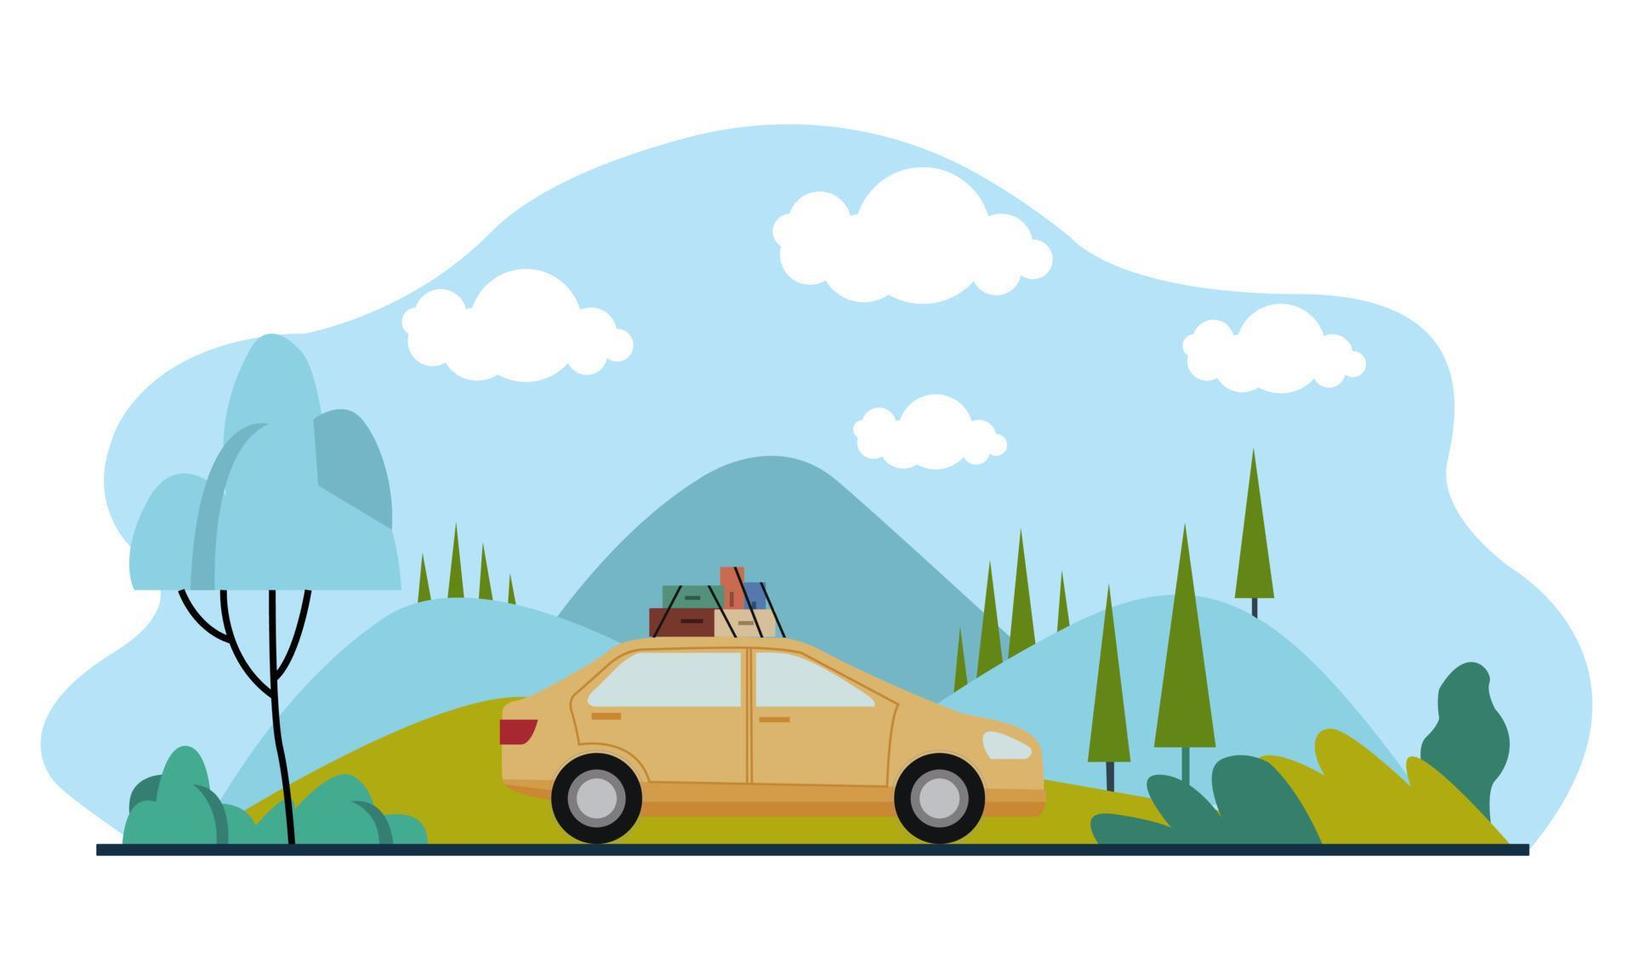 Family trip traveling by car on the background of a beautiful mountain landscape. Vector illustration of a flat design